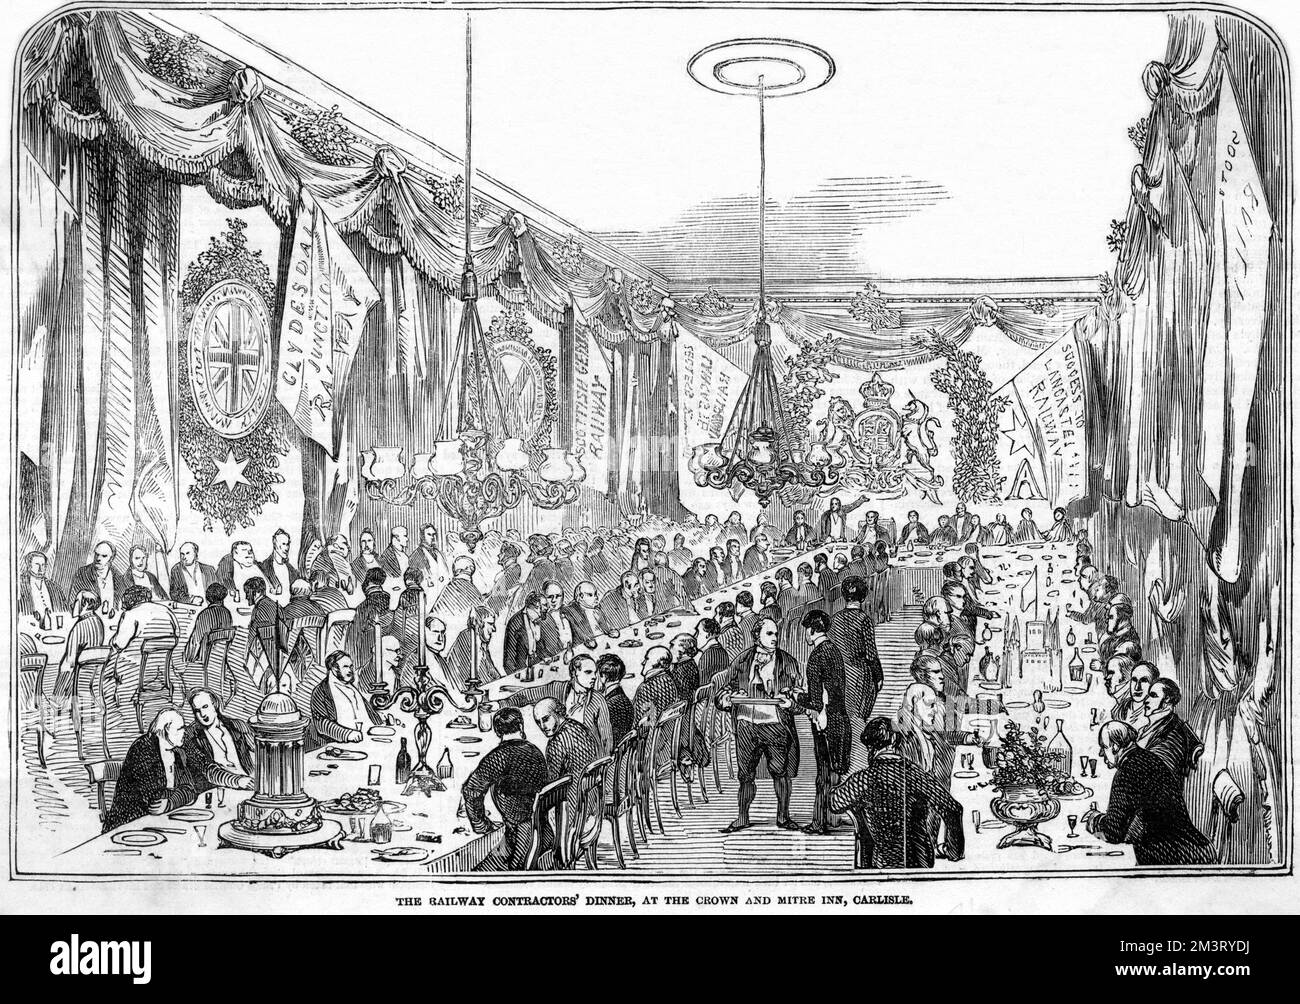 The railway contractors' dinner at the Crown and Mitre Inn, Carlisle, to celebrate the opening of the Lancaster and Carlisle Railway in autumn/winter 1846. The contractors were Stephenson, Mackenzie &amp; Co.     Date: 1846 Stock Photo